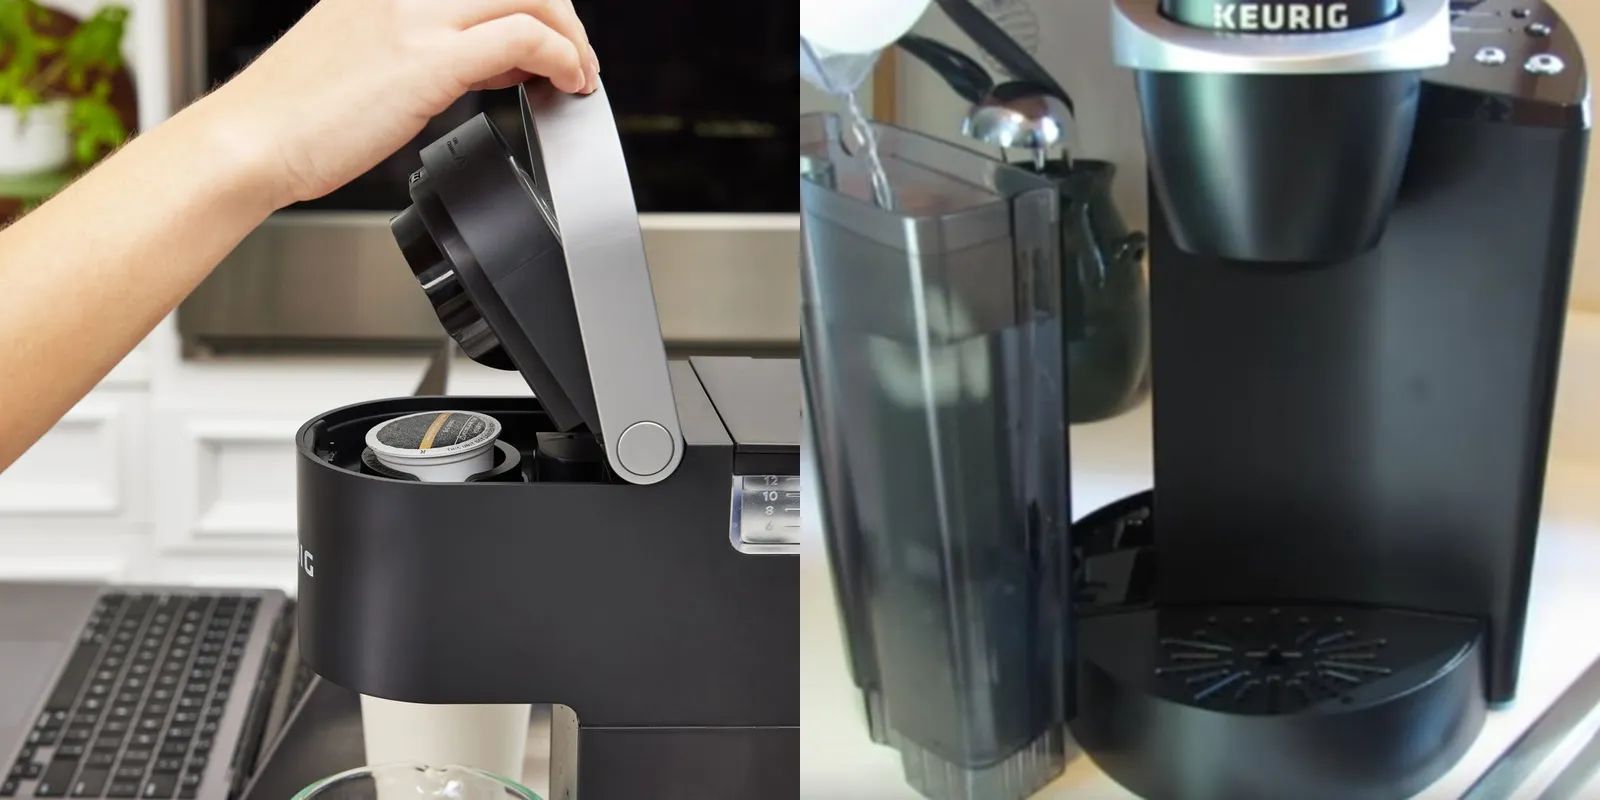 How To Work A Keurig